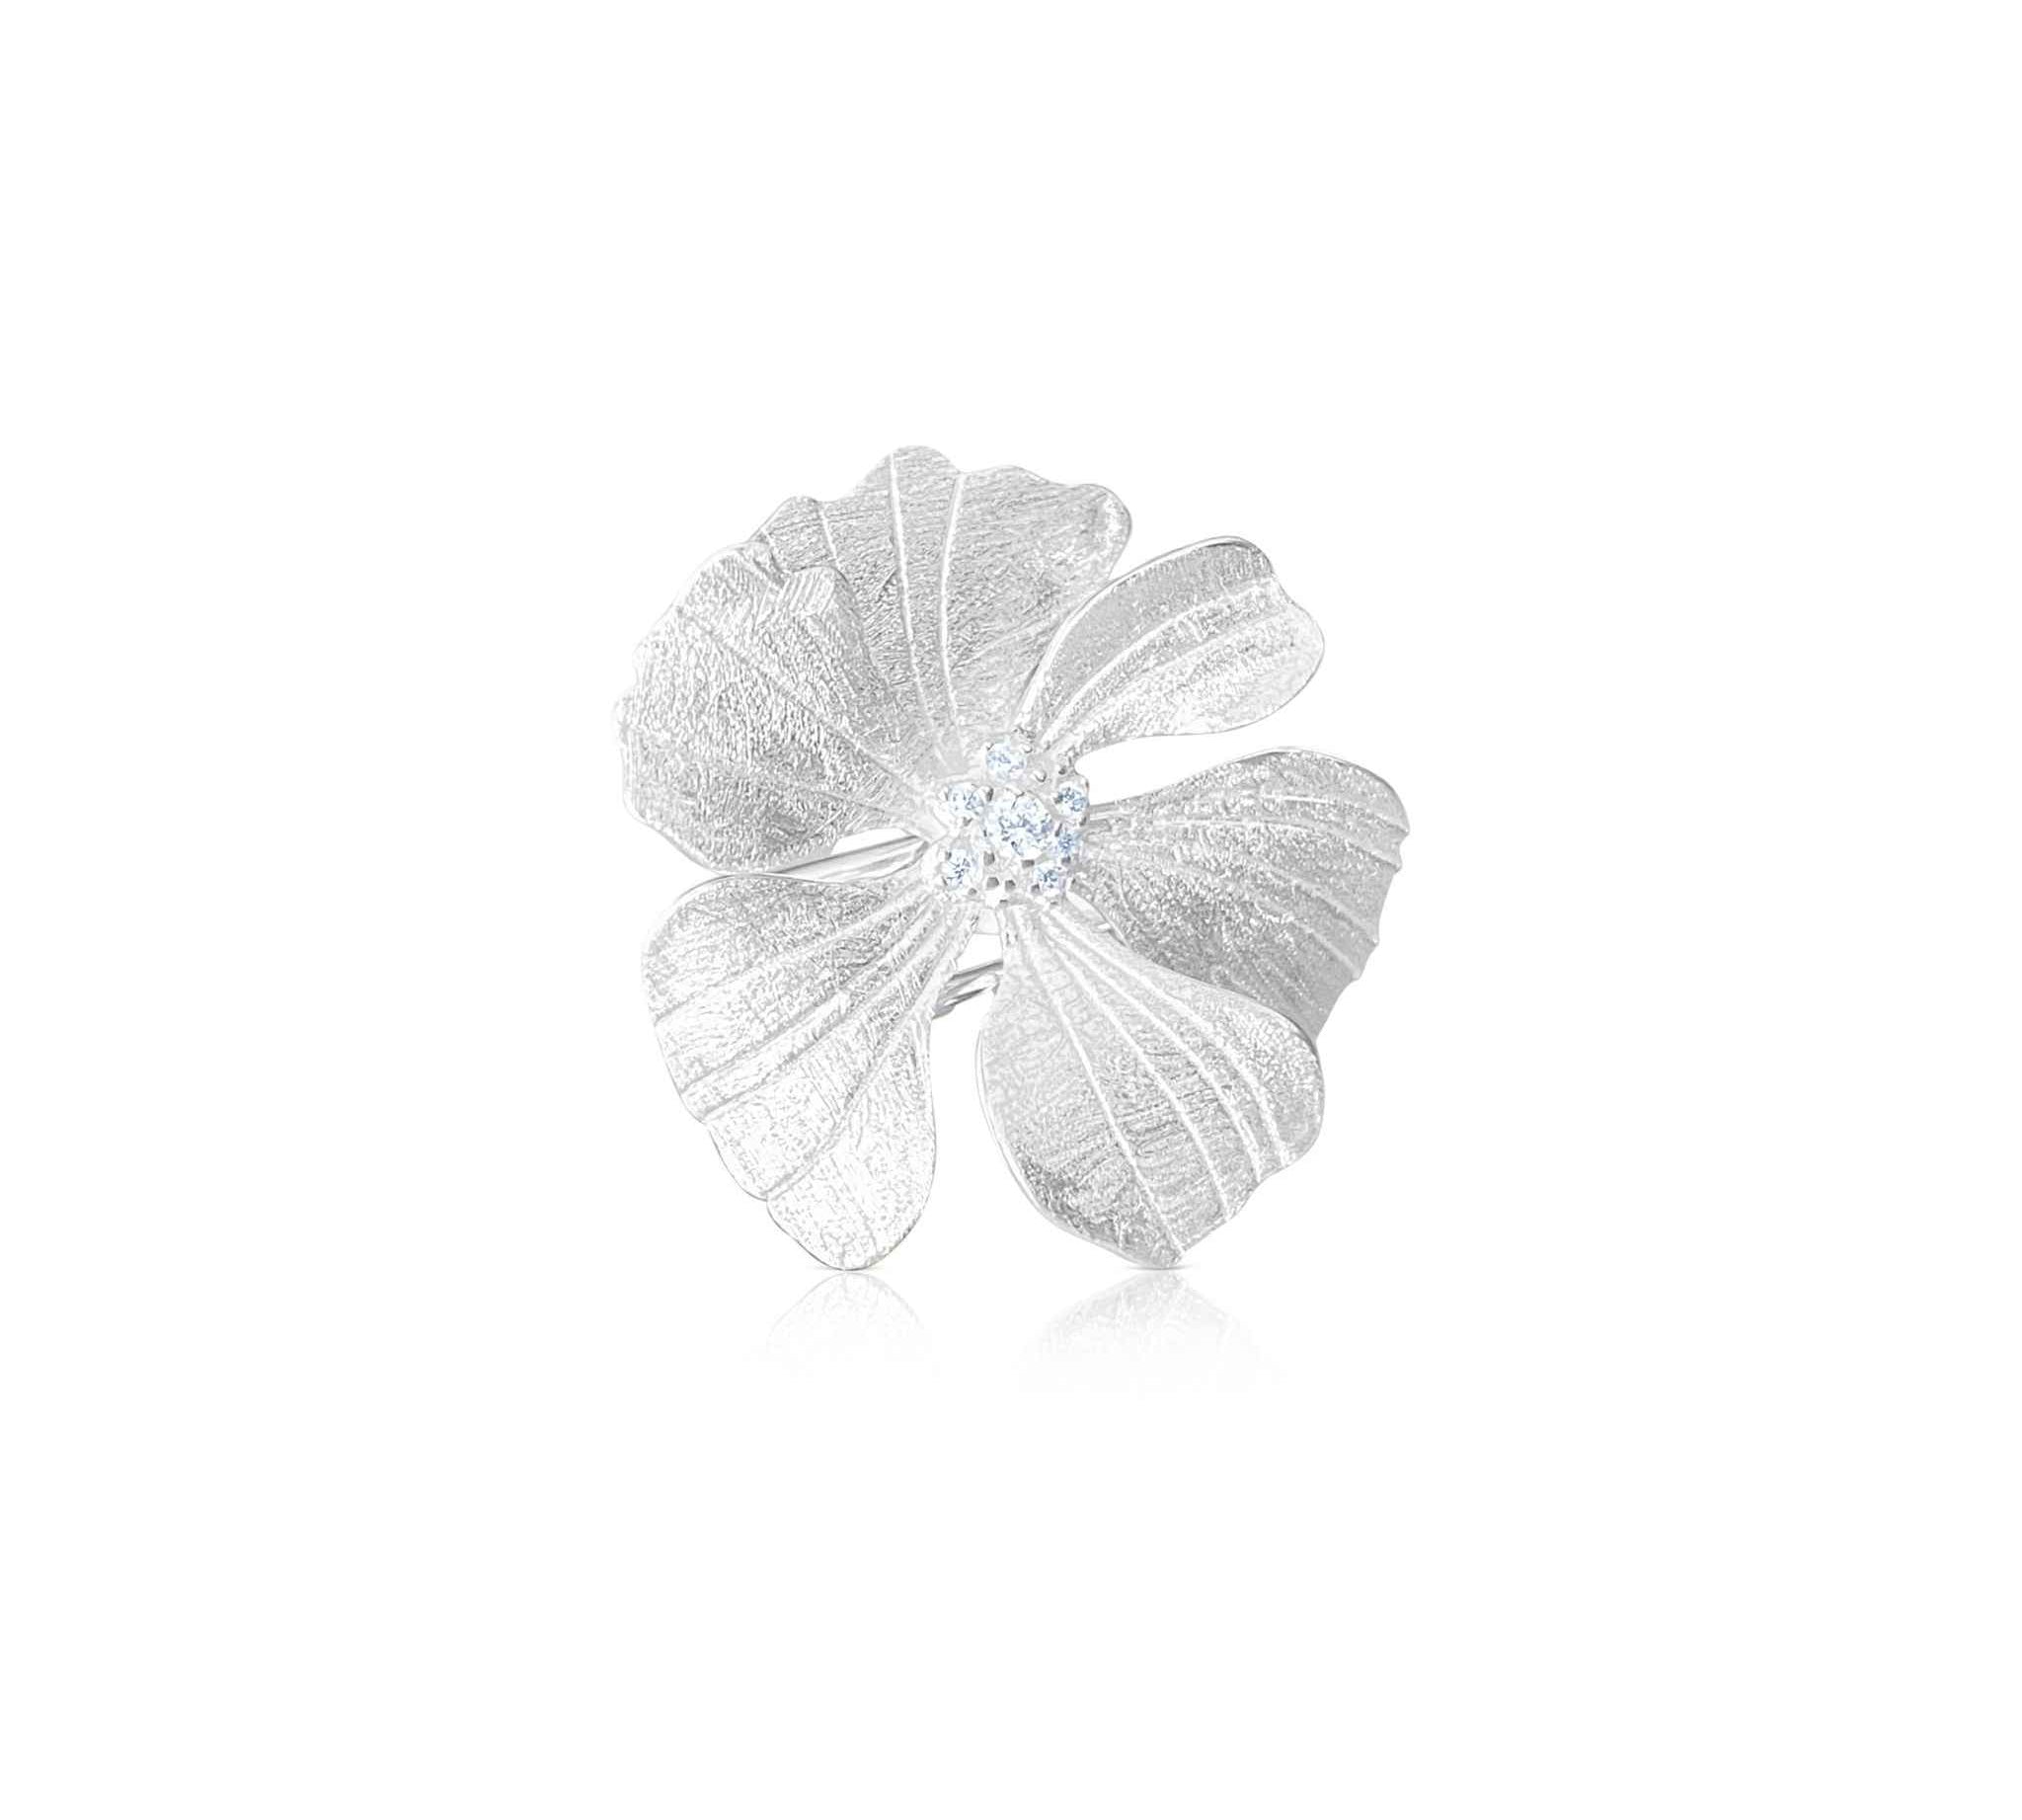 Stylish Peony Cocktail Ring in Silver showcasing intricate petal detailing - Alessandra James.